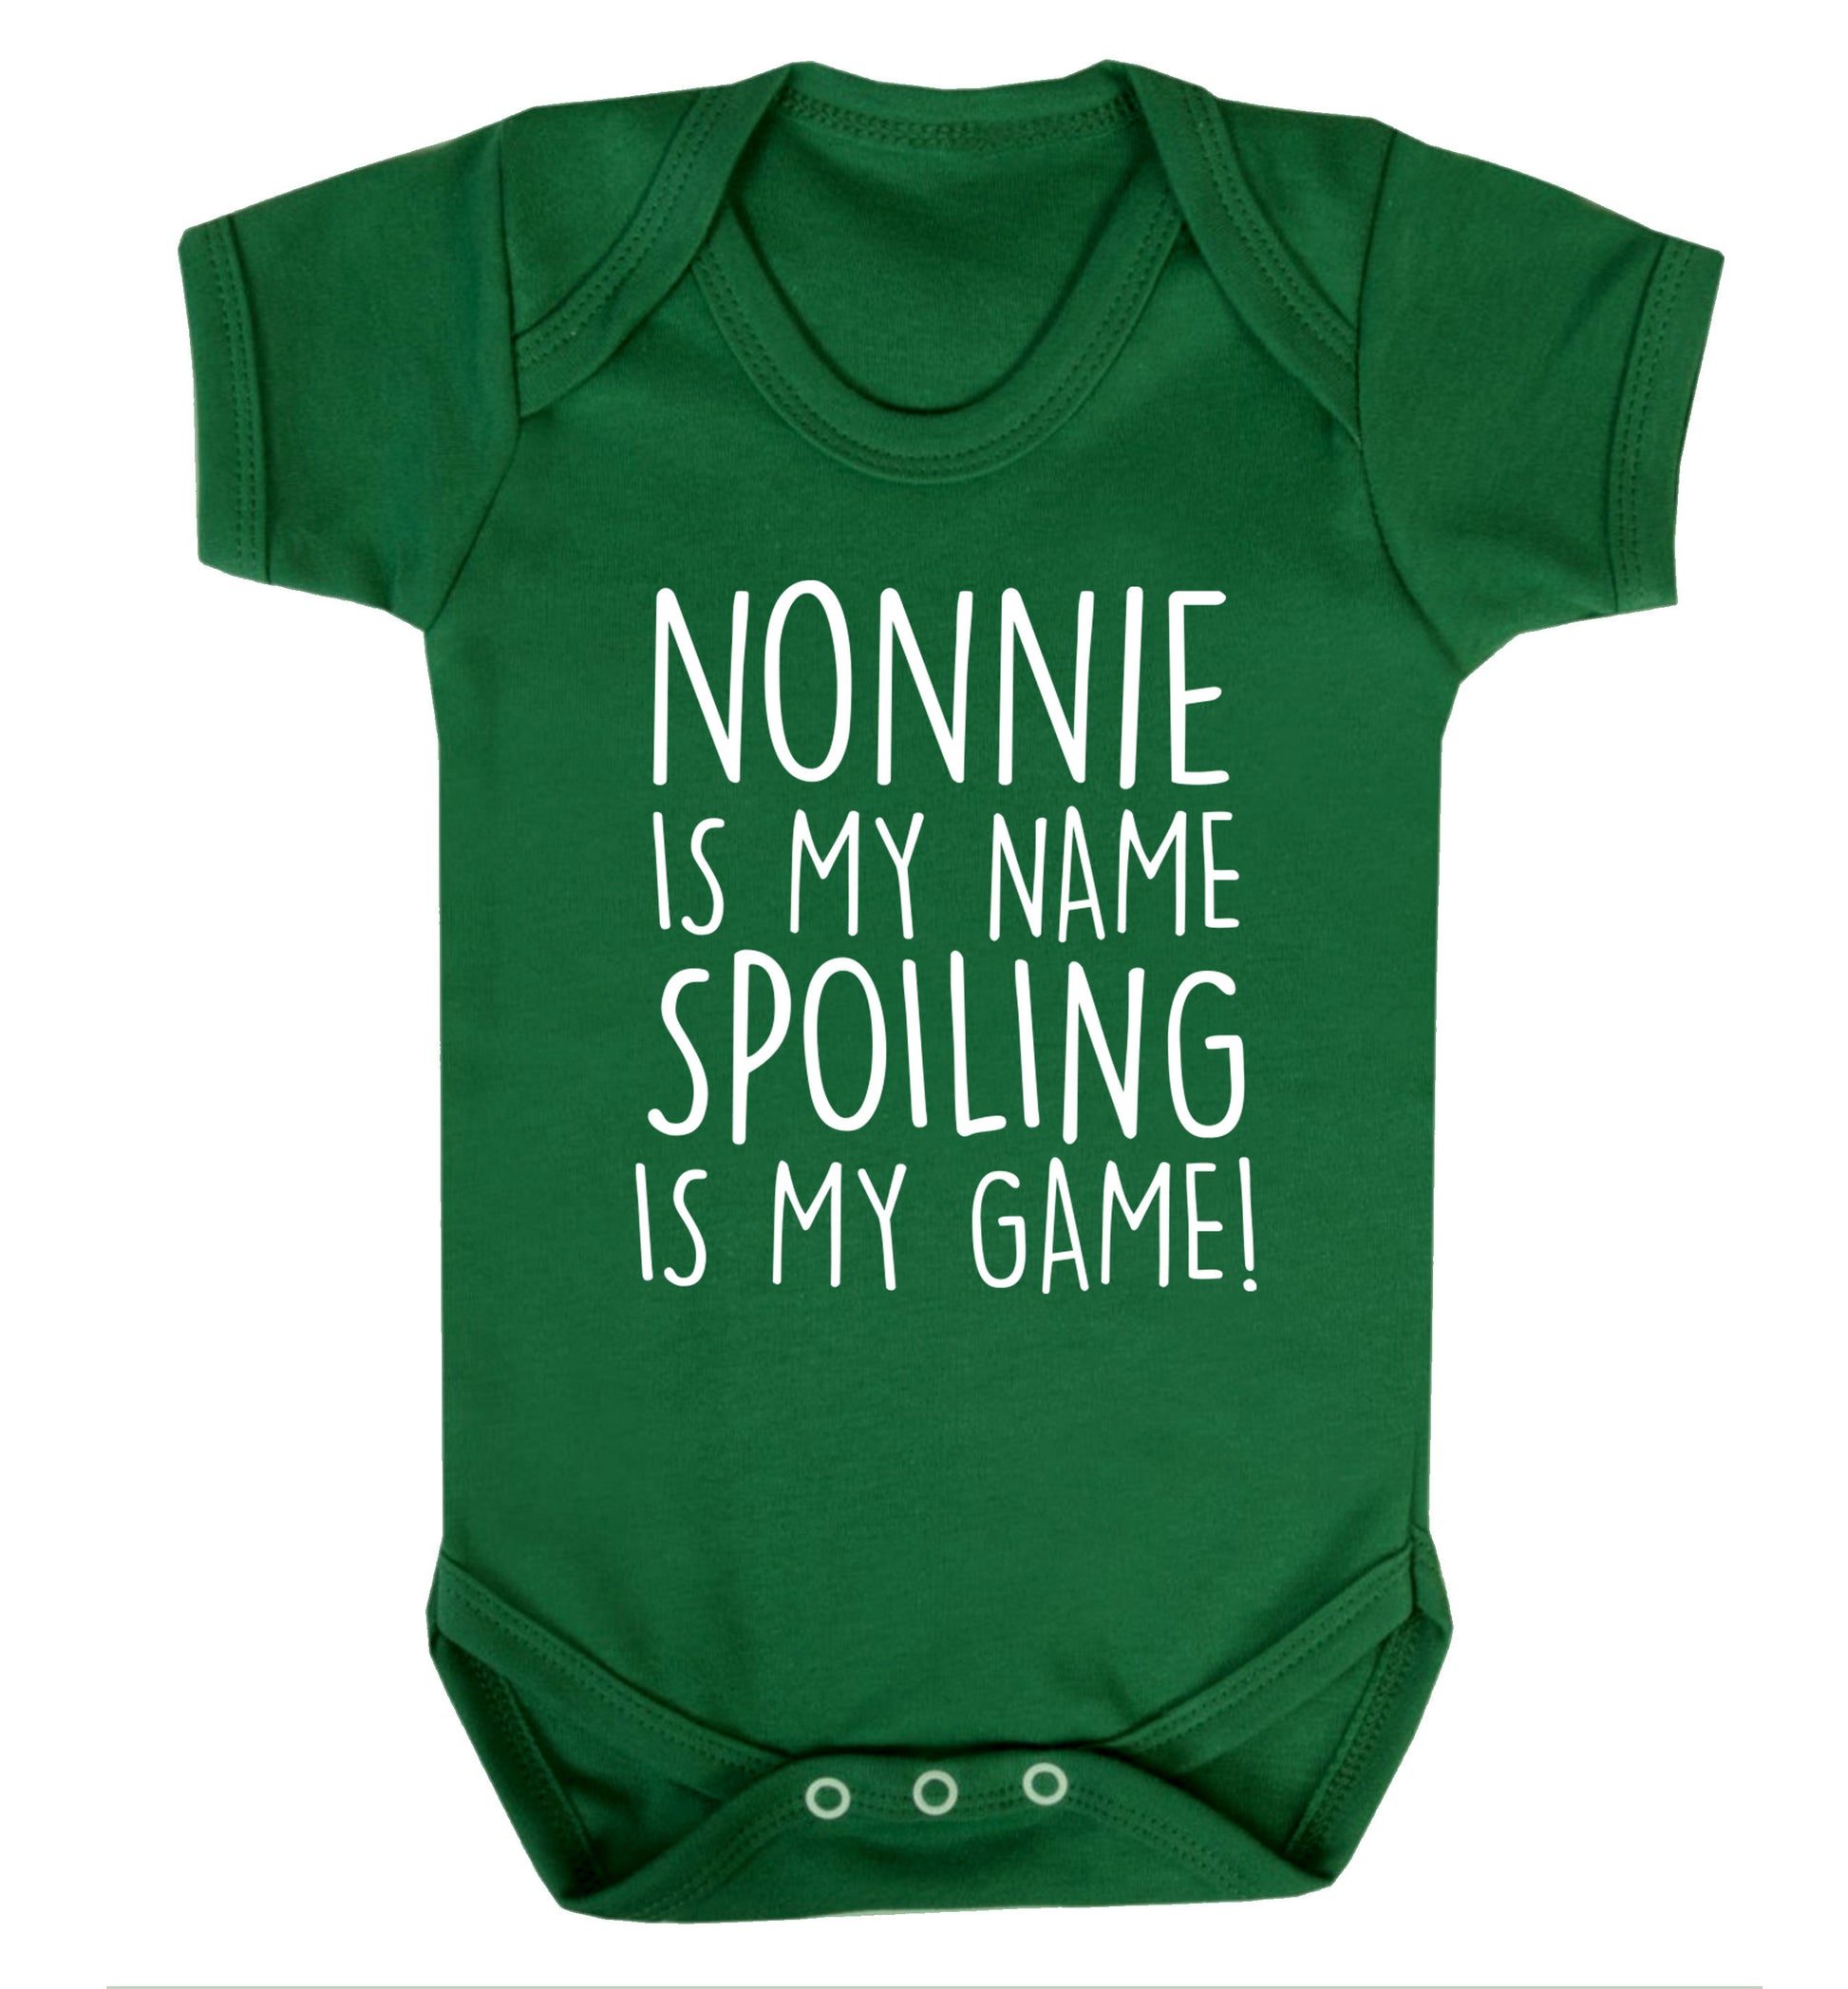 Nonnie is my name, spoiling is my game Baby Vest green 18-24 months